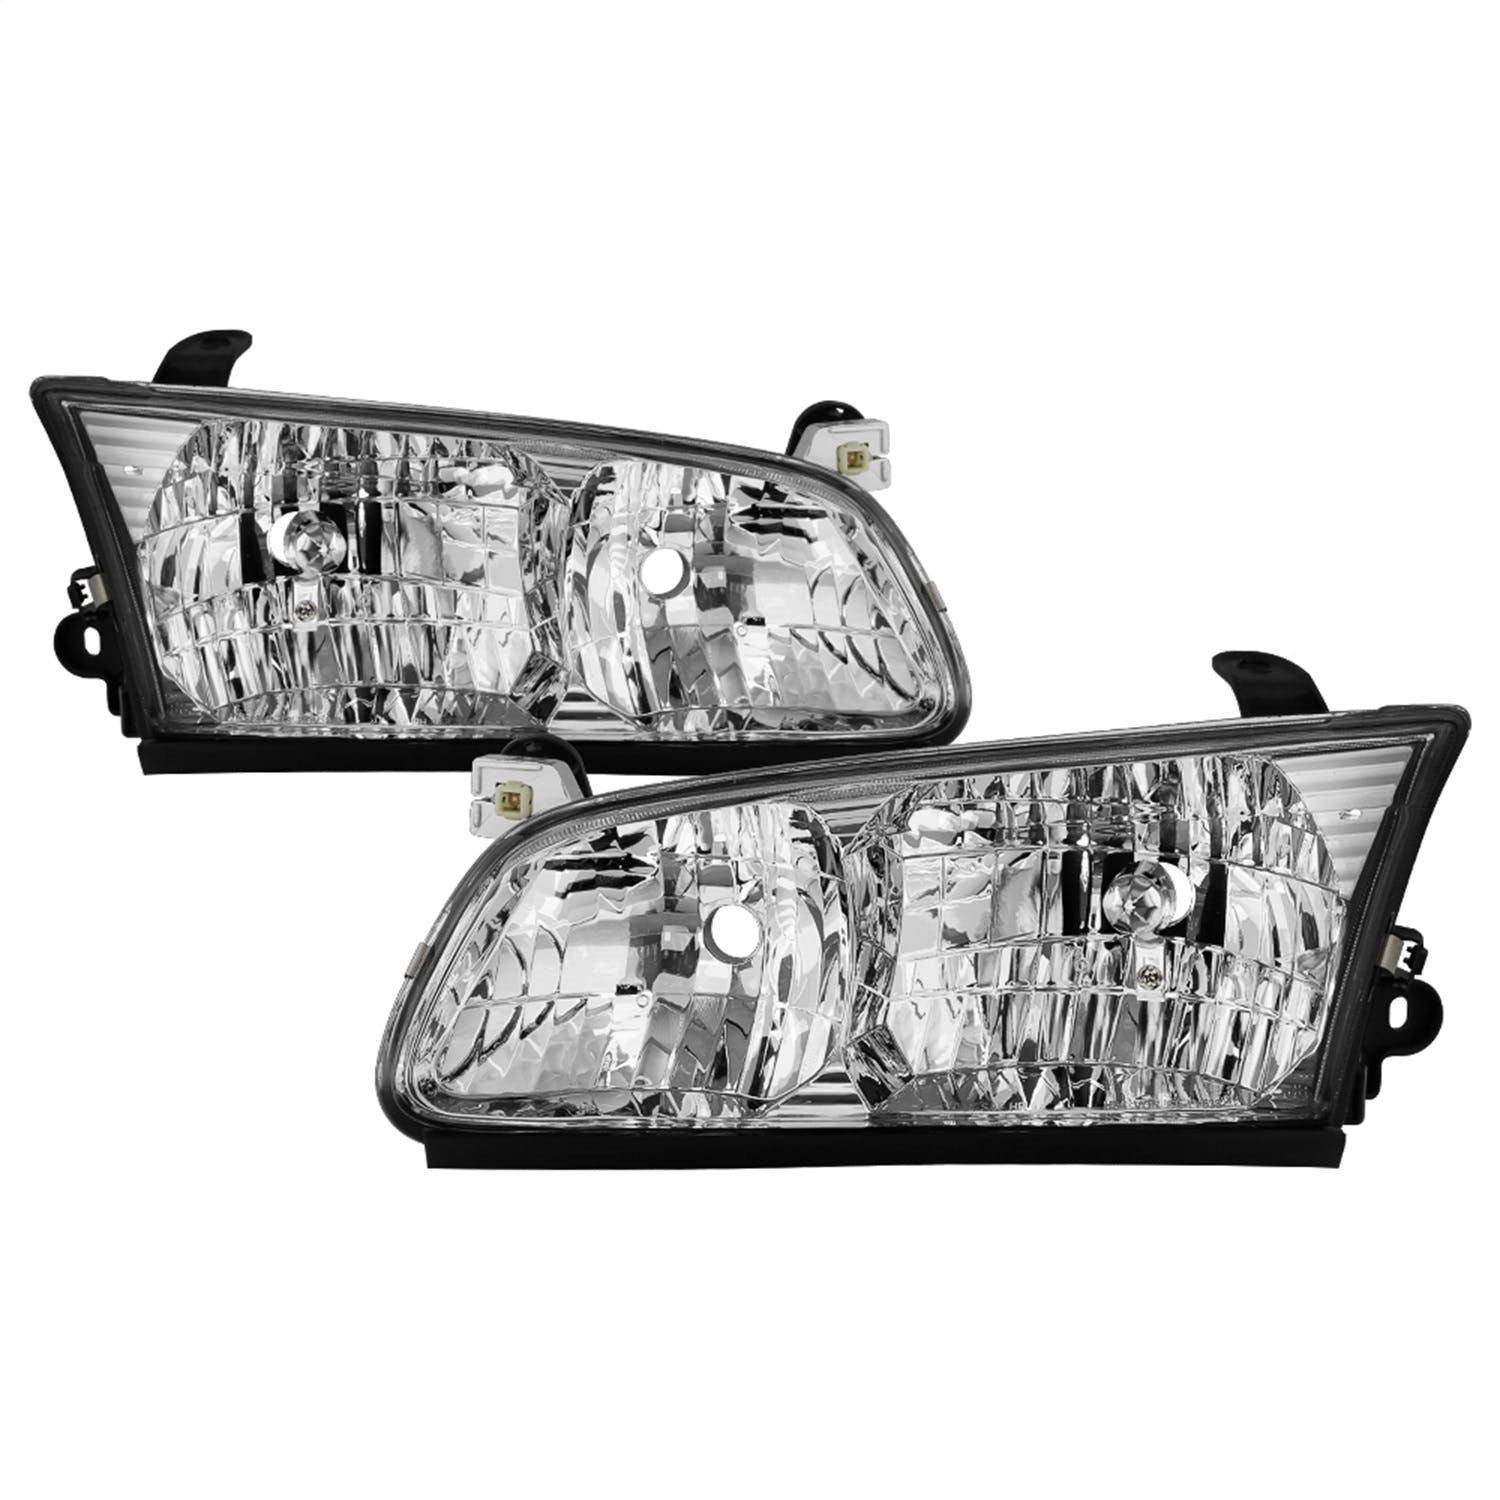 XTUNE POWER 9042805 Toyota Camry 00 01 OEM Style Headlights Low Beam HB4(Not Included) ; High Beam HB3(Not Included) Chrome